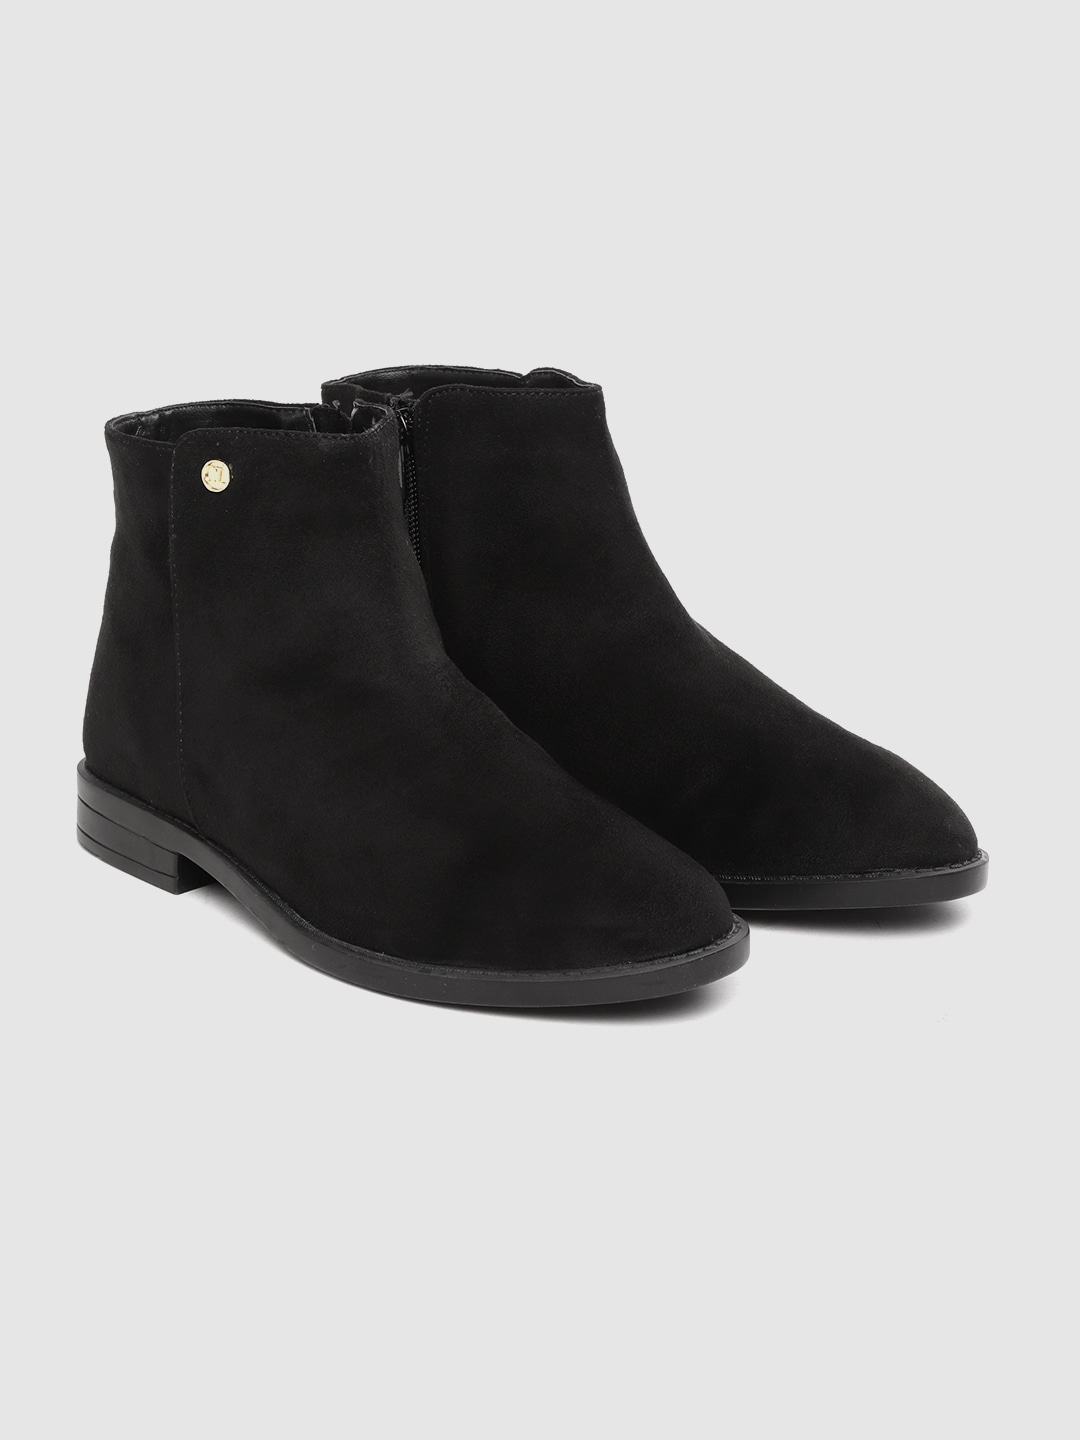 Carlton London Women Black Solid Mid-Top Flat Boots Price in India